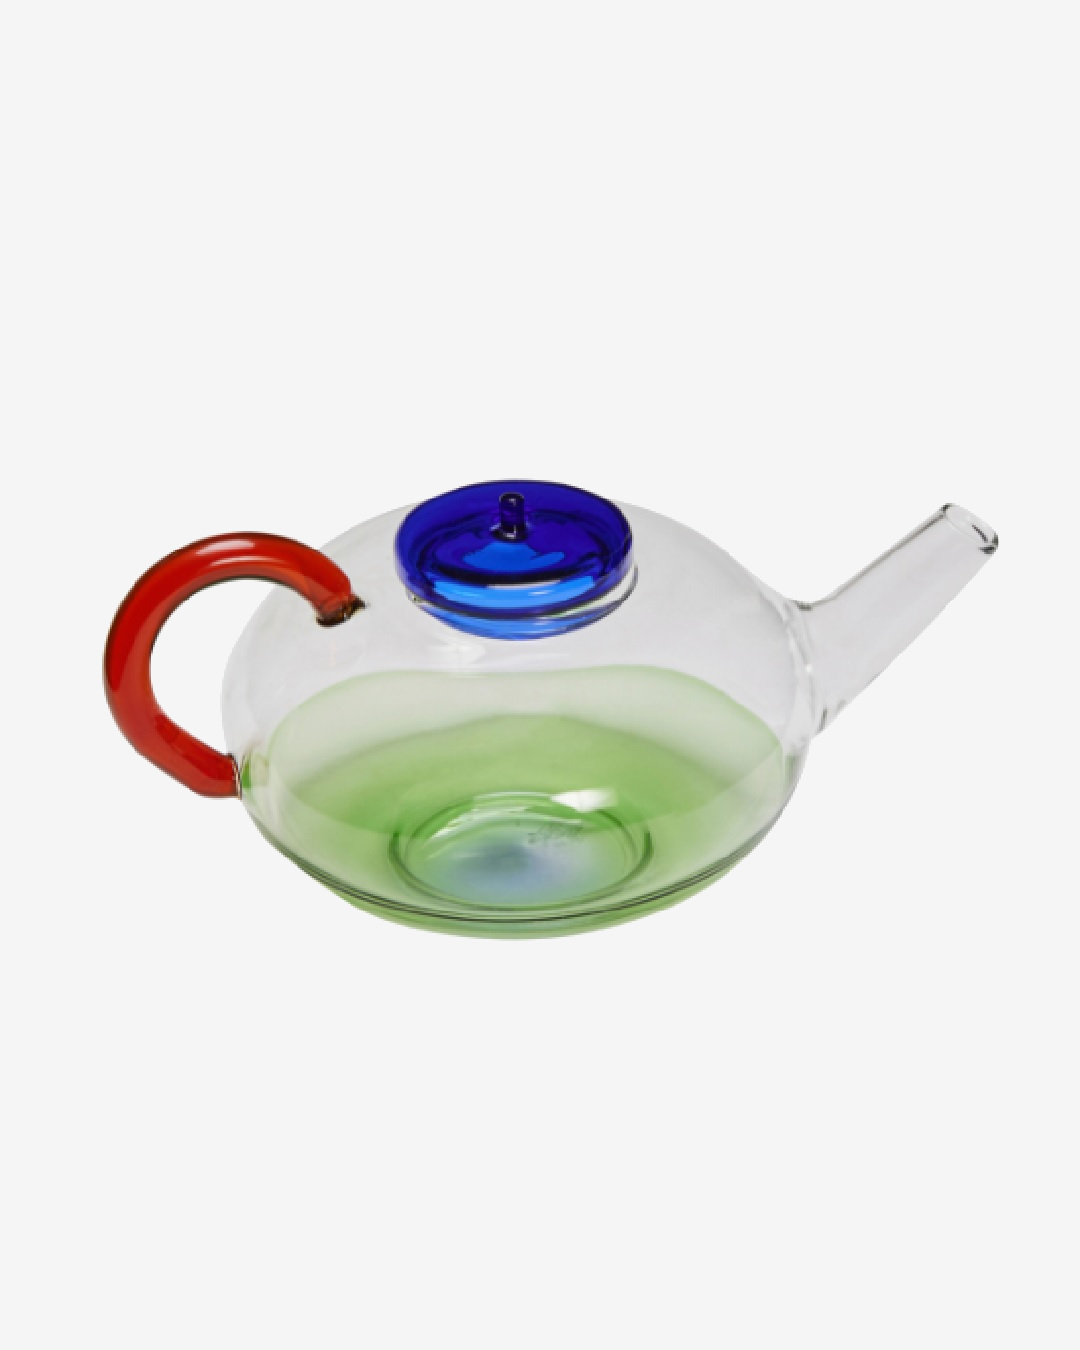 Clear teapot in green and blue with red handle